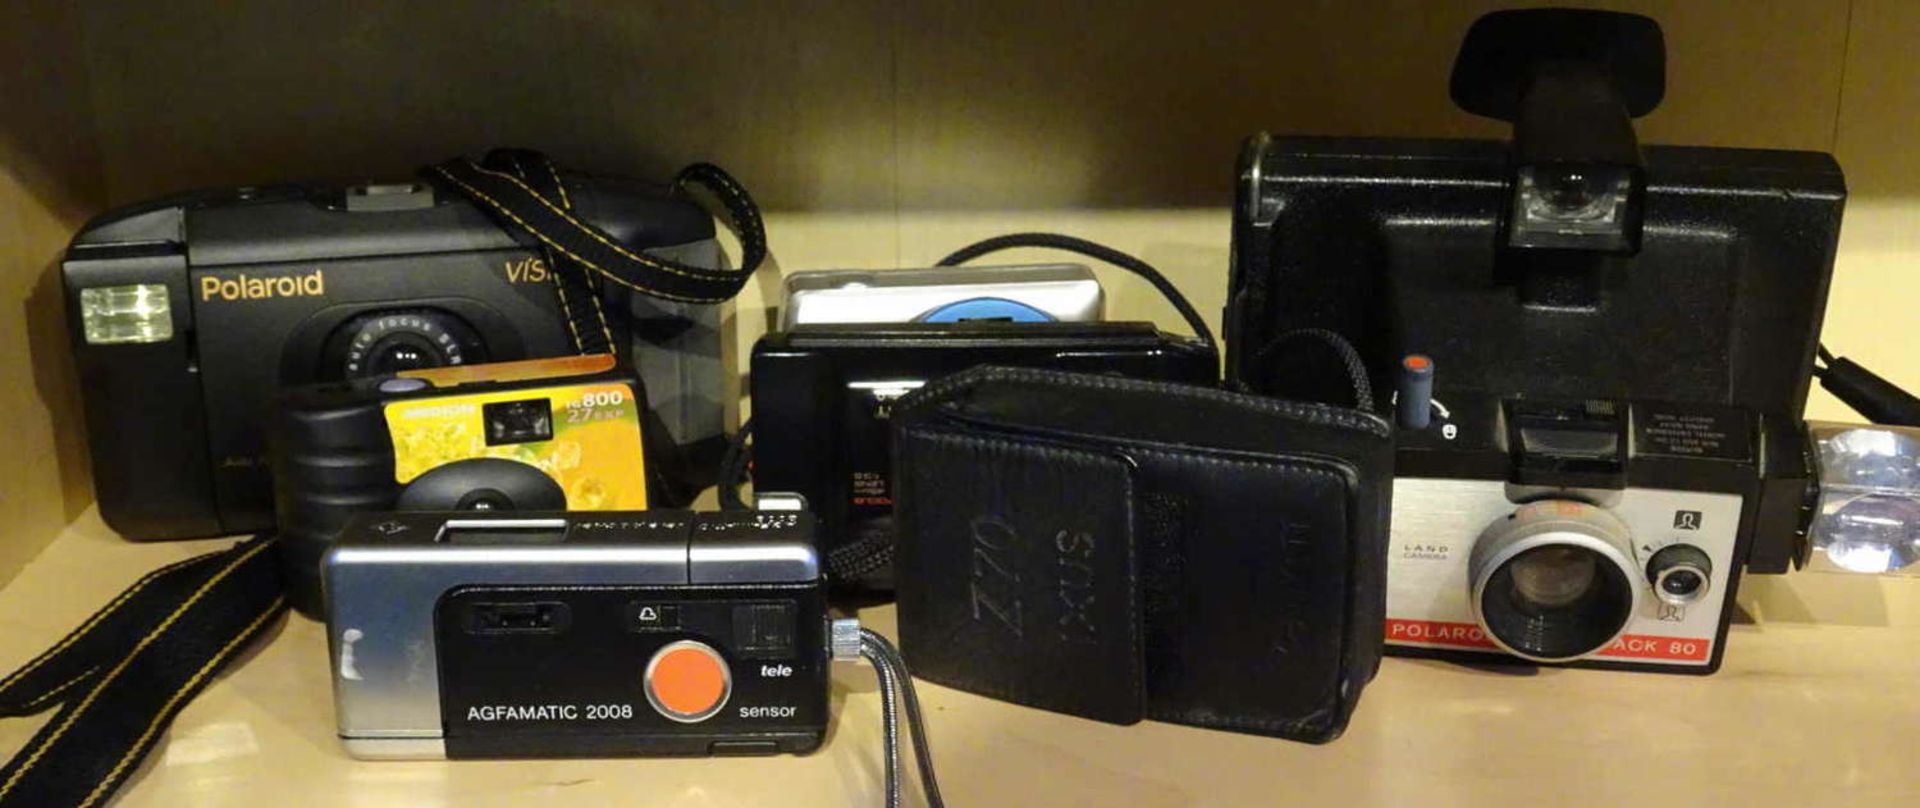 Lot cameras, 7 pieces, including: Polaroid, Canon, Agfa, etc., various models, function not